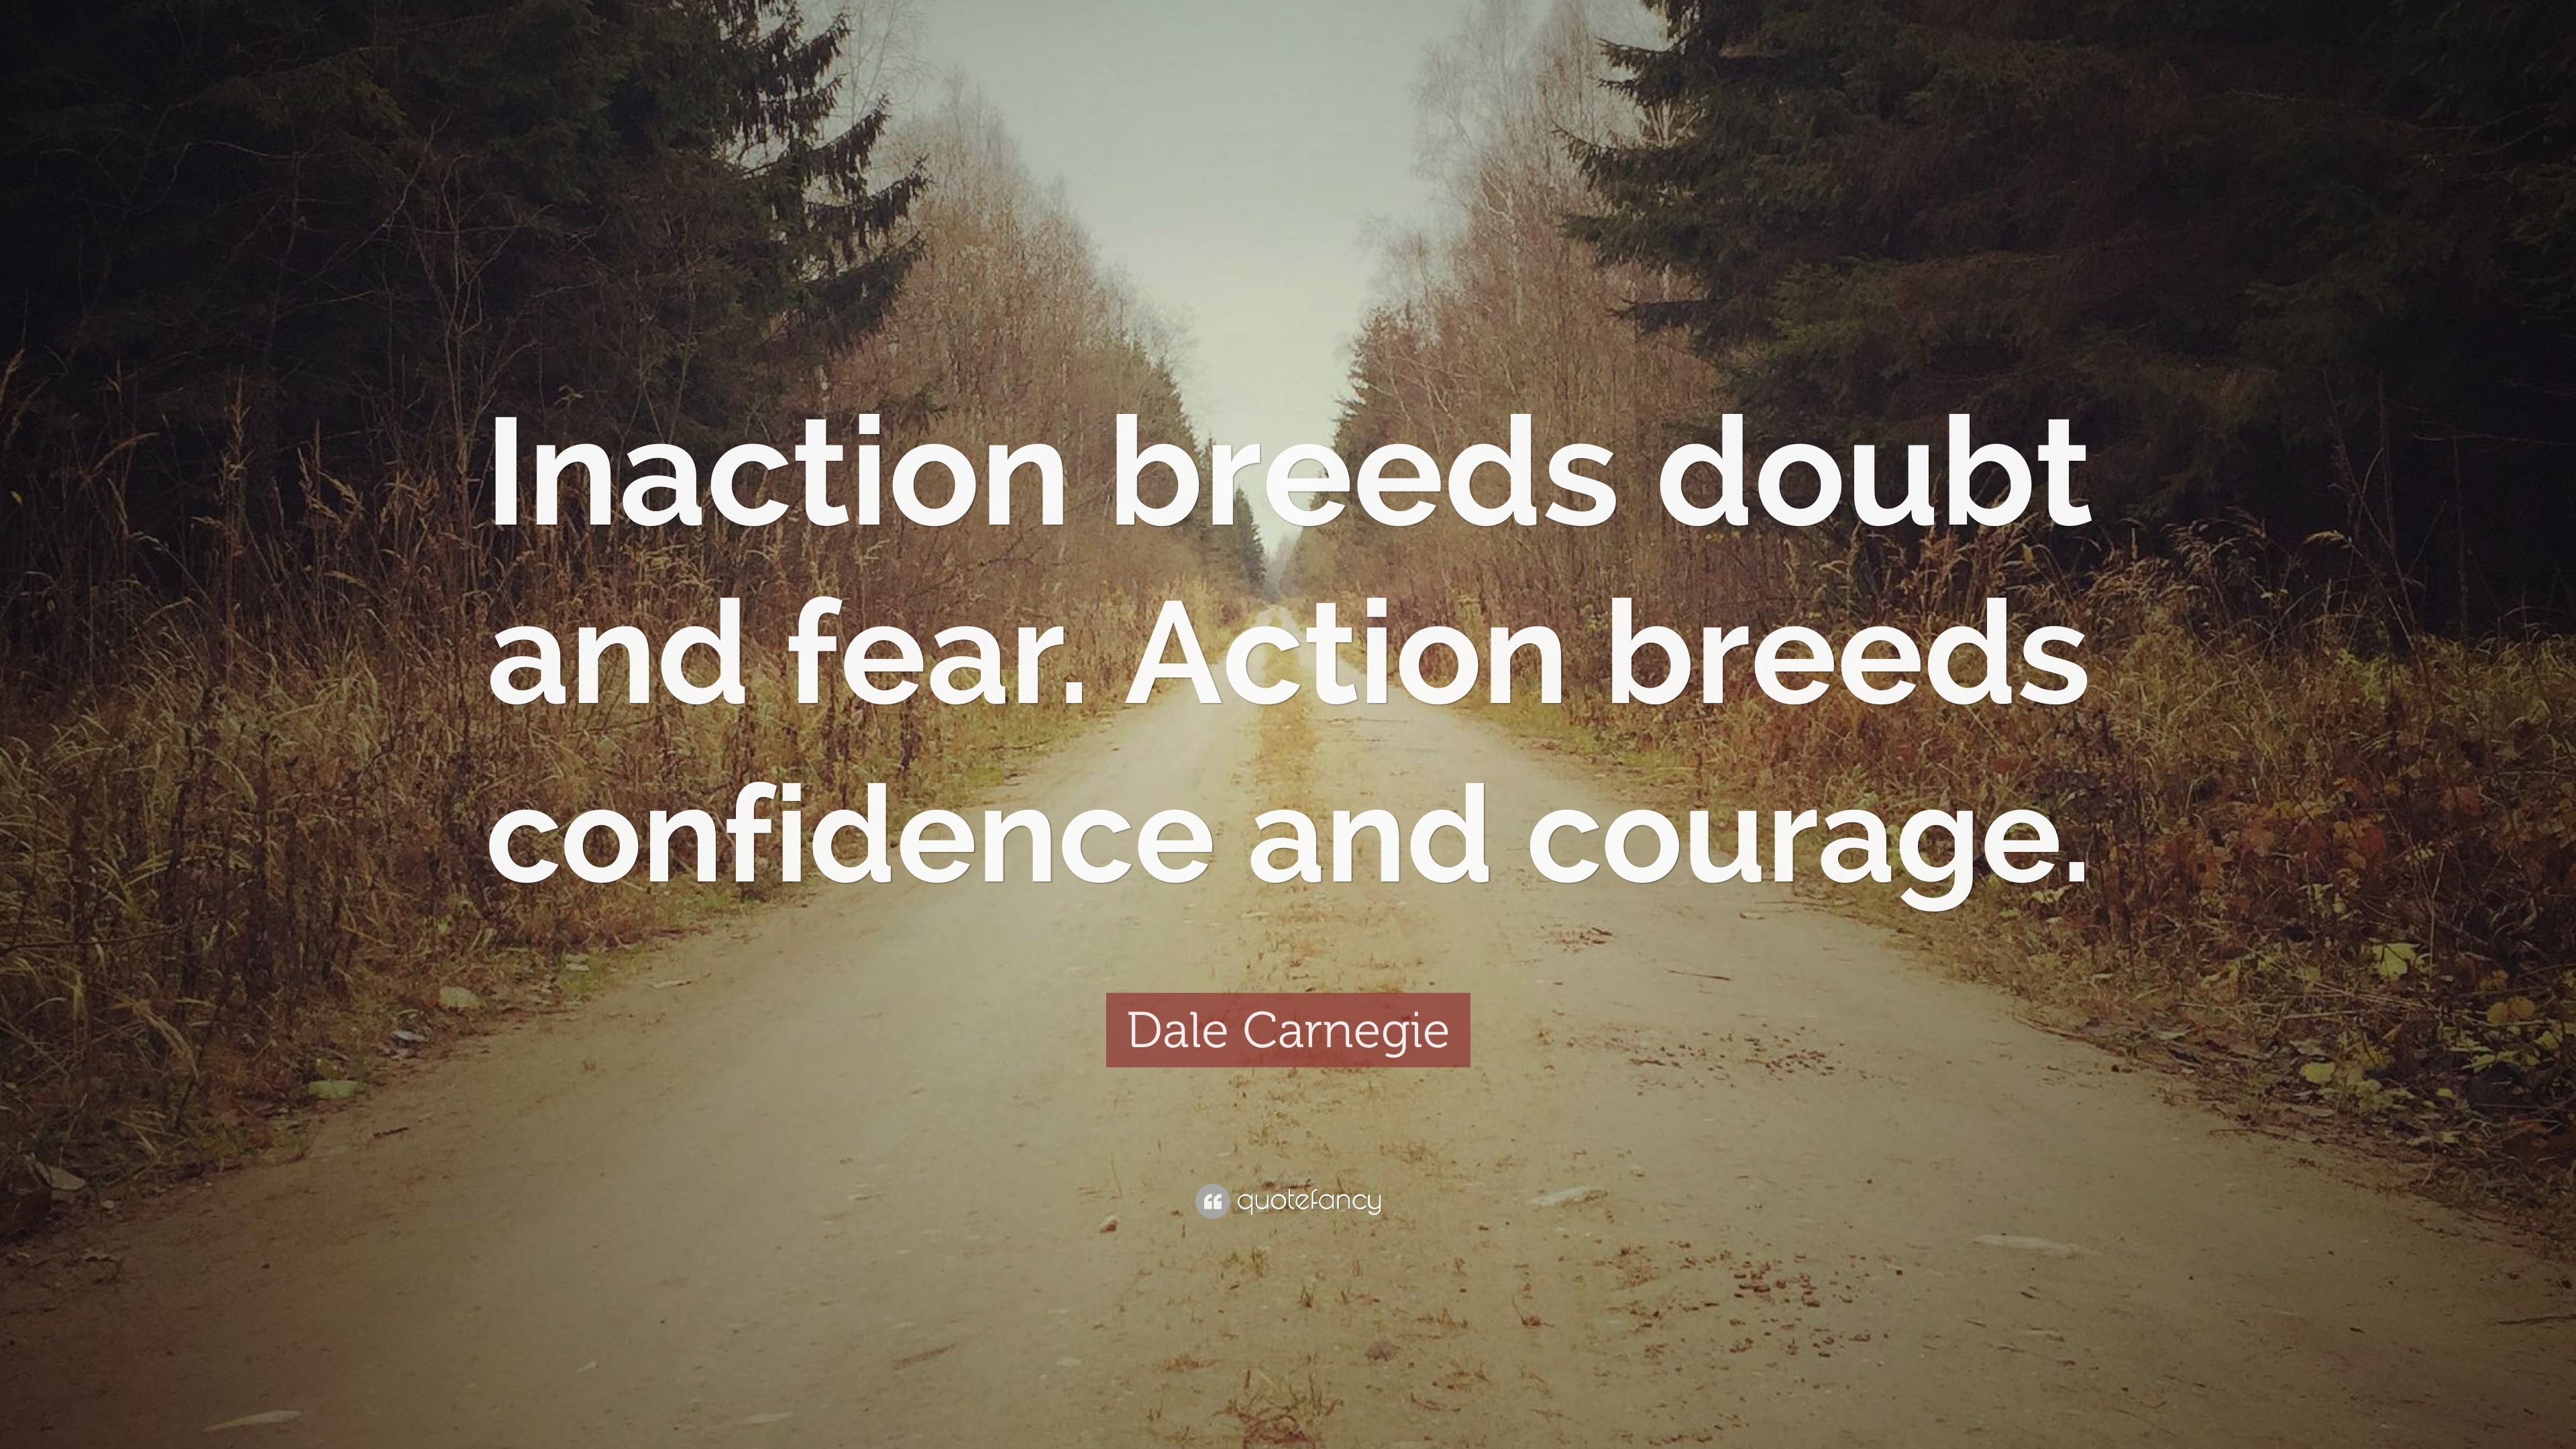 Dale Carnegie Quote: “Inaction breeds doubt and fear. Action breeds